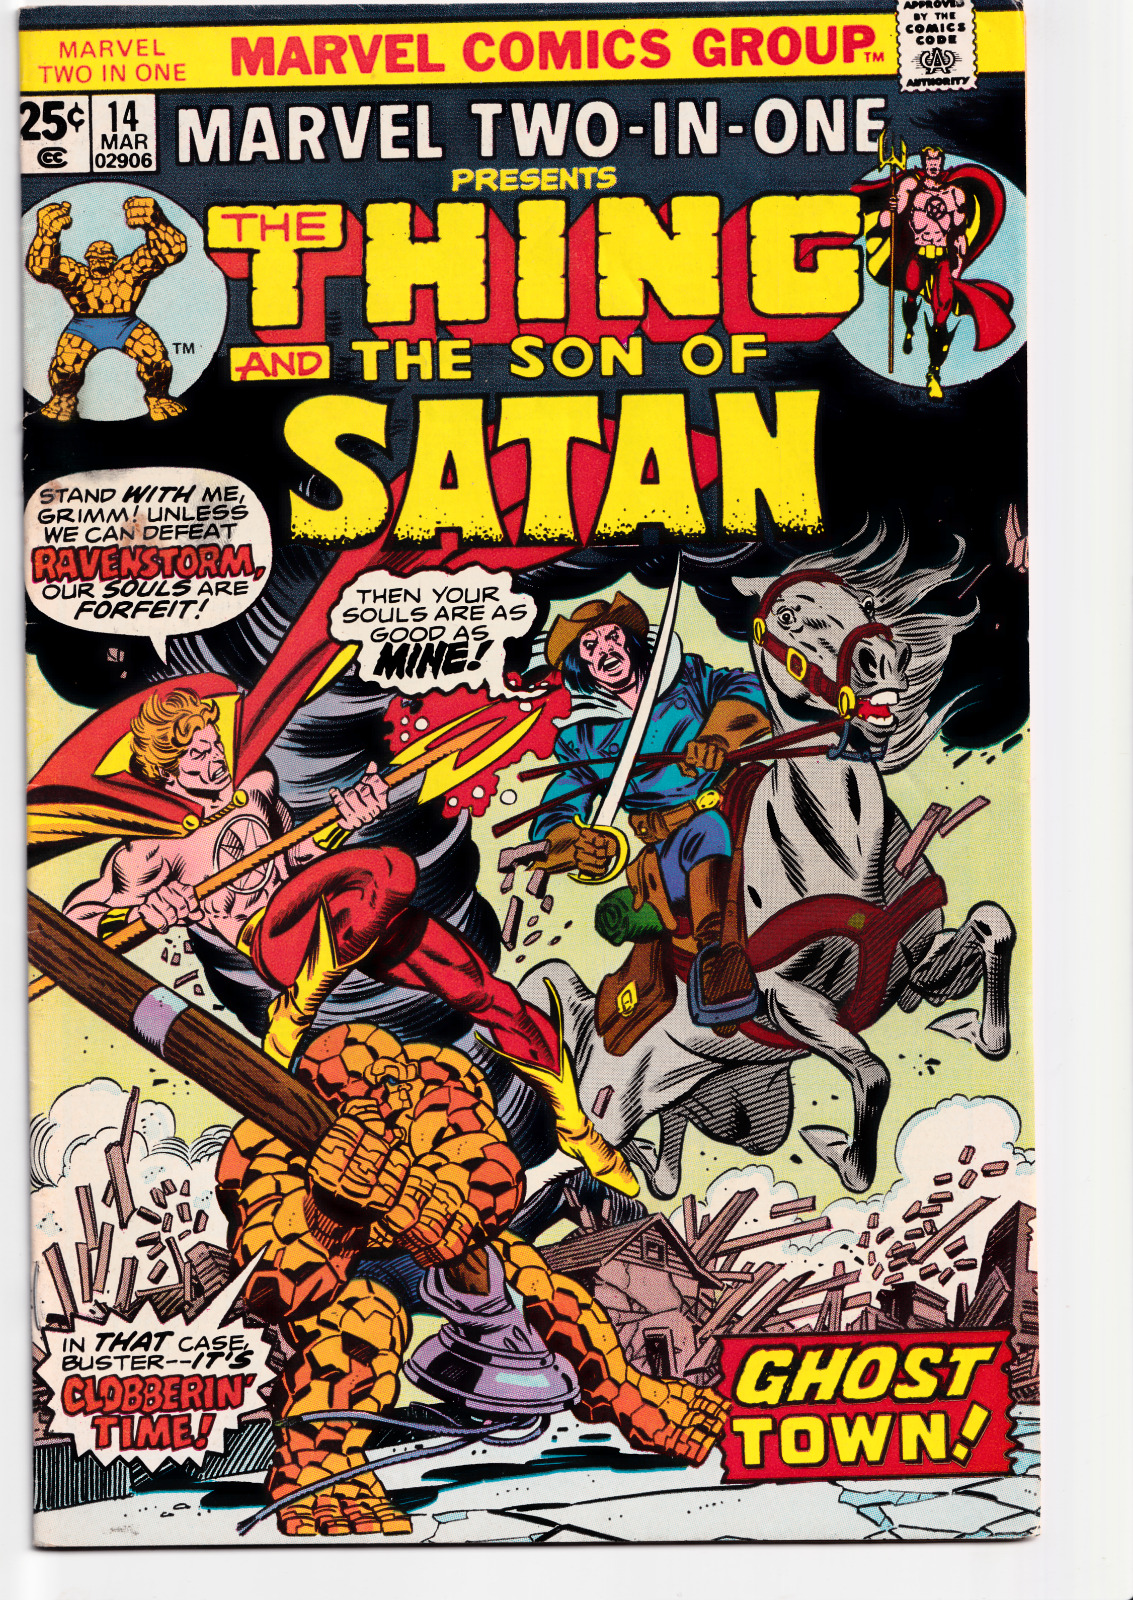 Marvel Two-In-One #14 1976 Marvel Comics